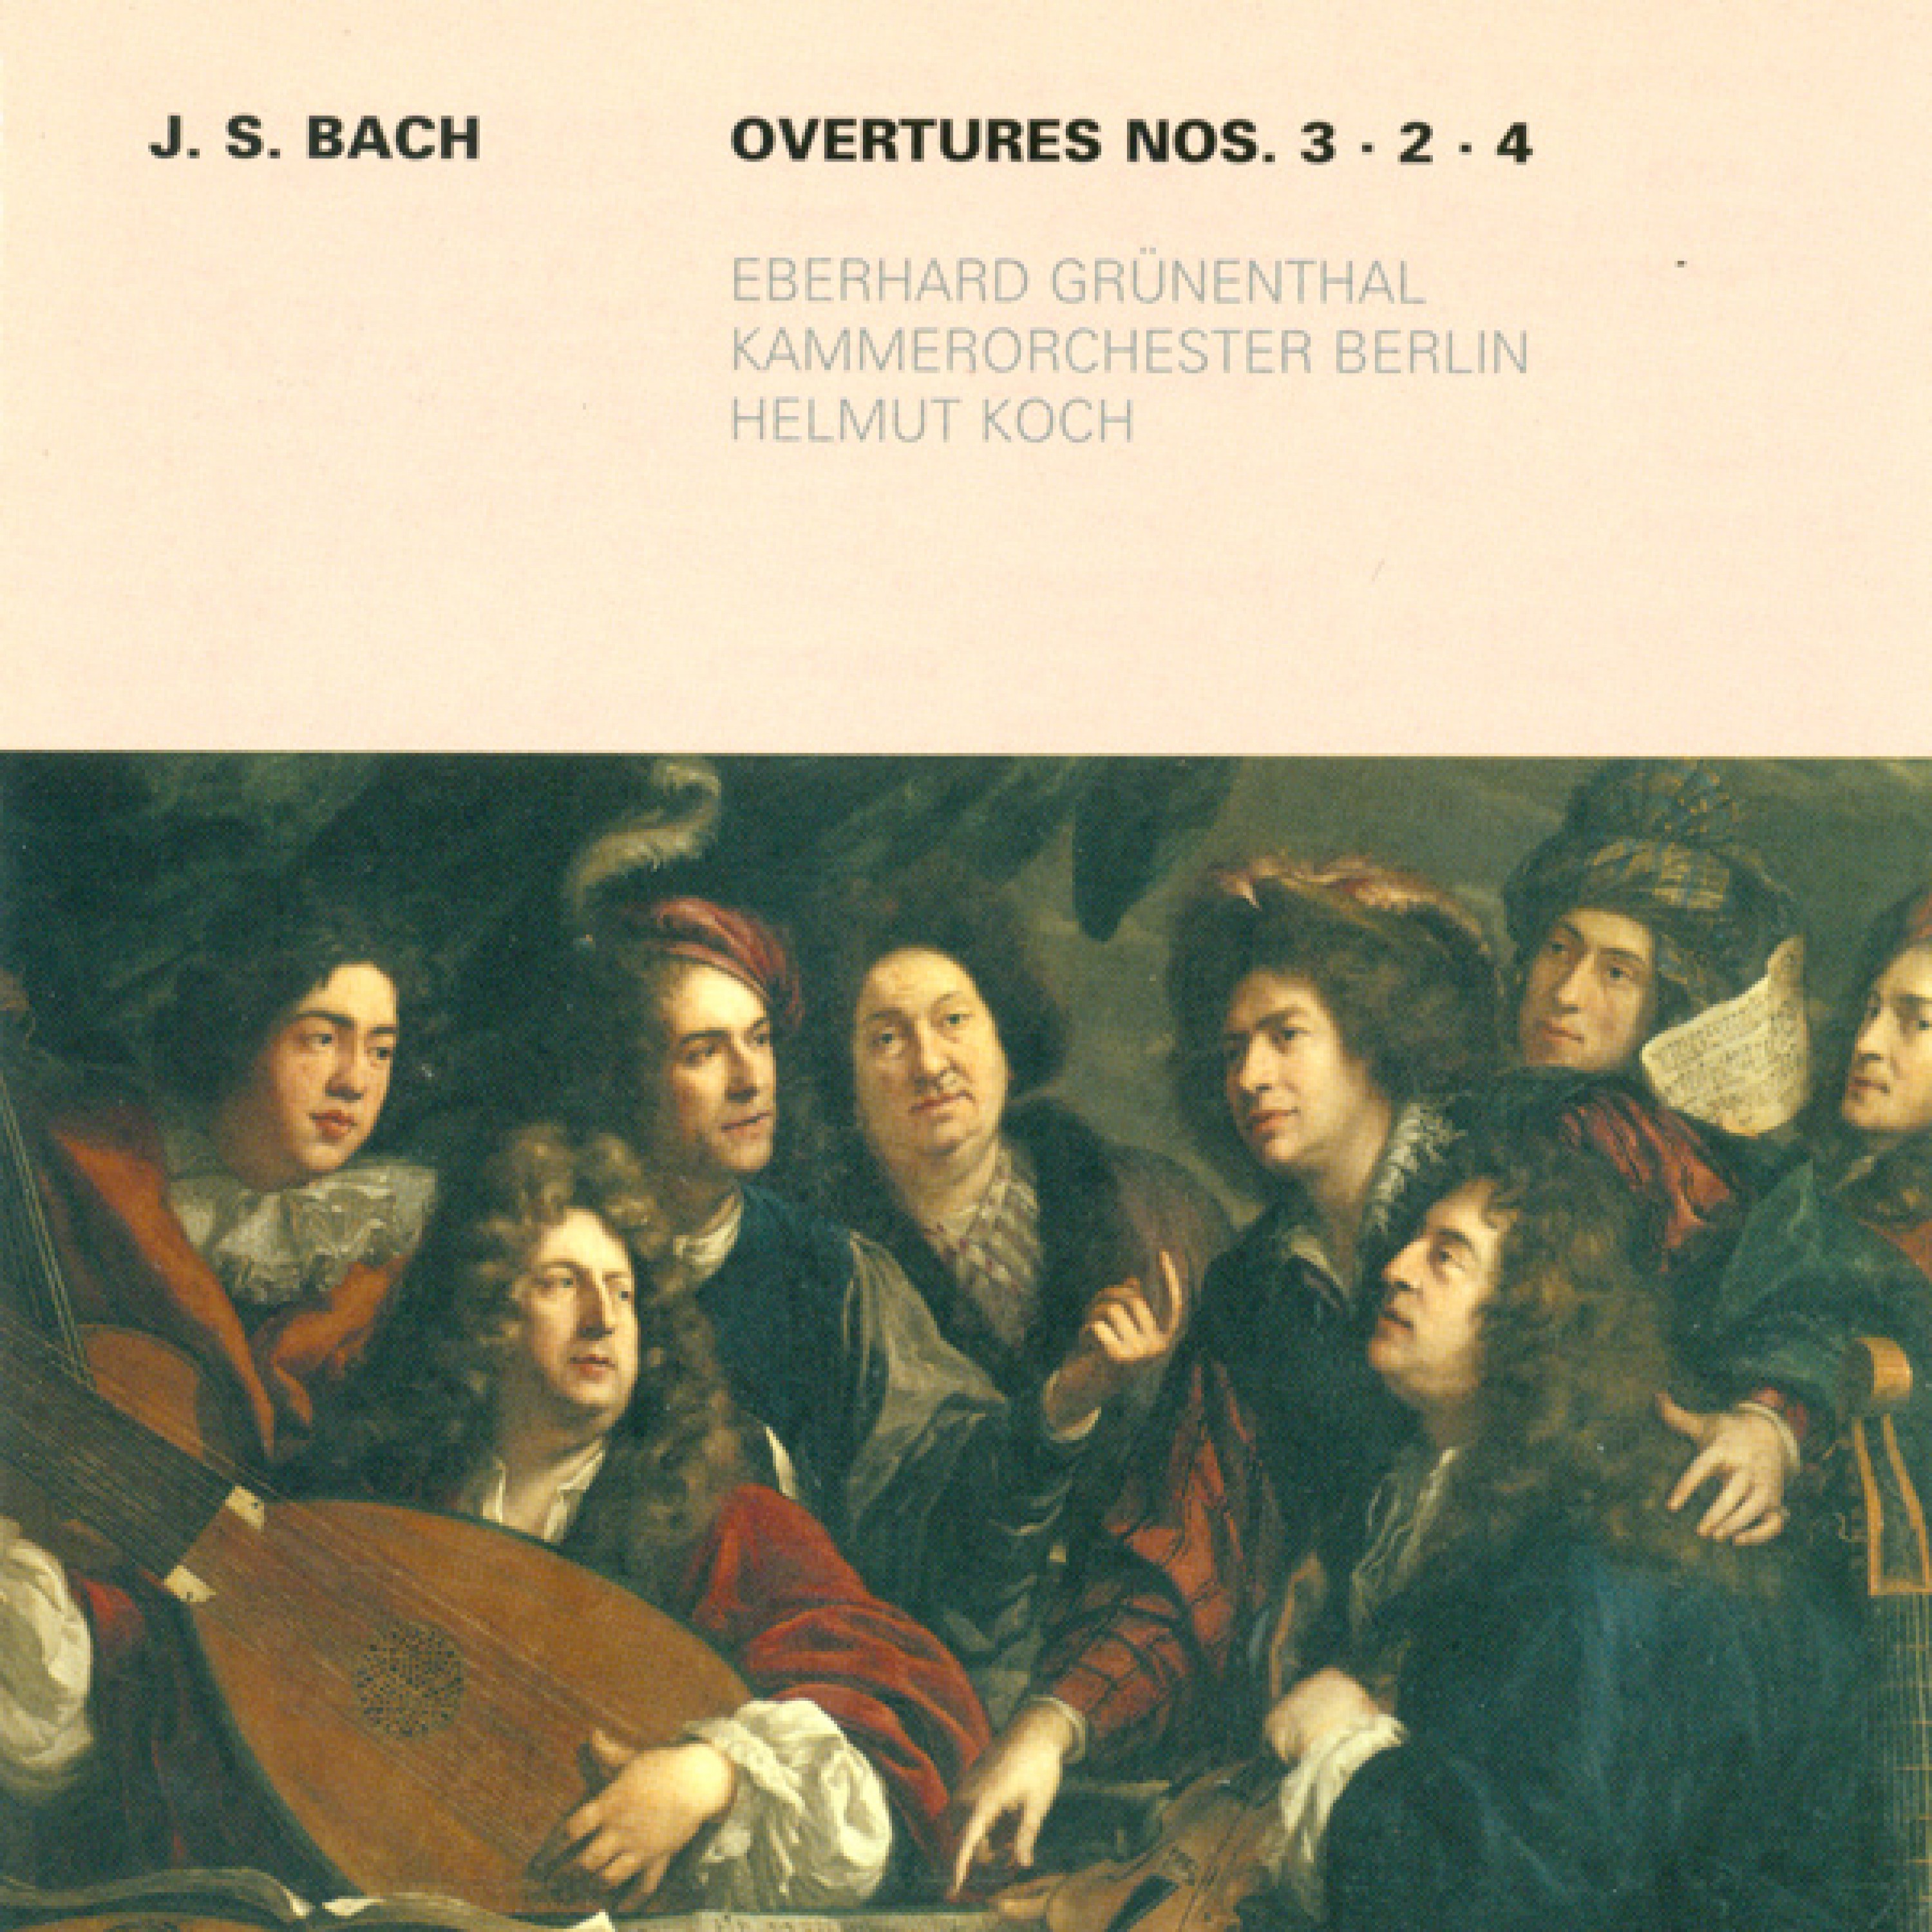 Overture (Suite) No. 2 in B Minor, BWV 1067: I. Ouverture